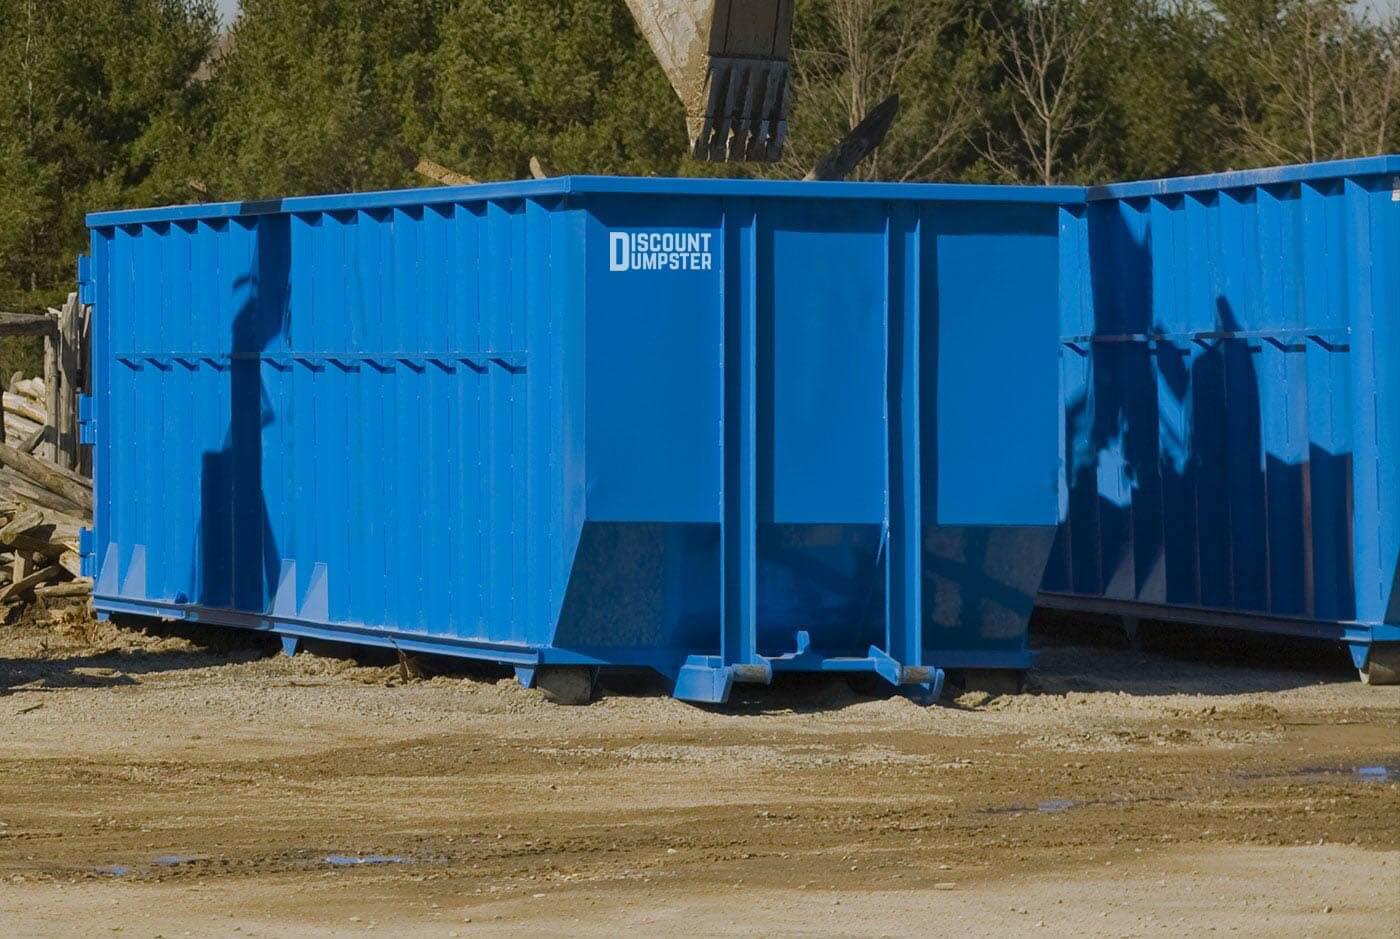 Our unbeatable roll off dumpsters in Denver co can handle all your commercial and residential waste removal